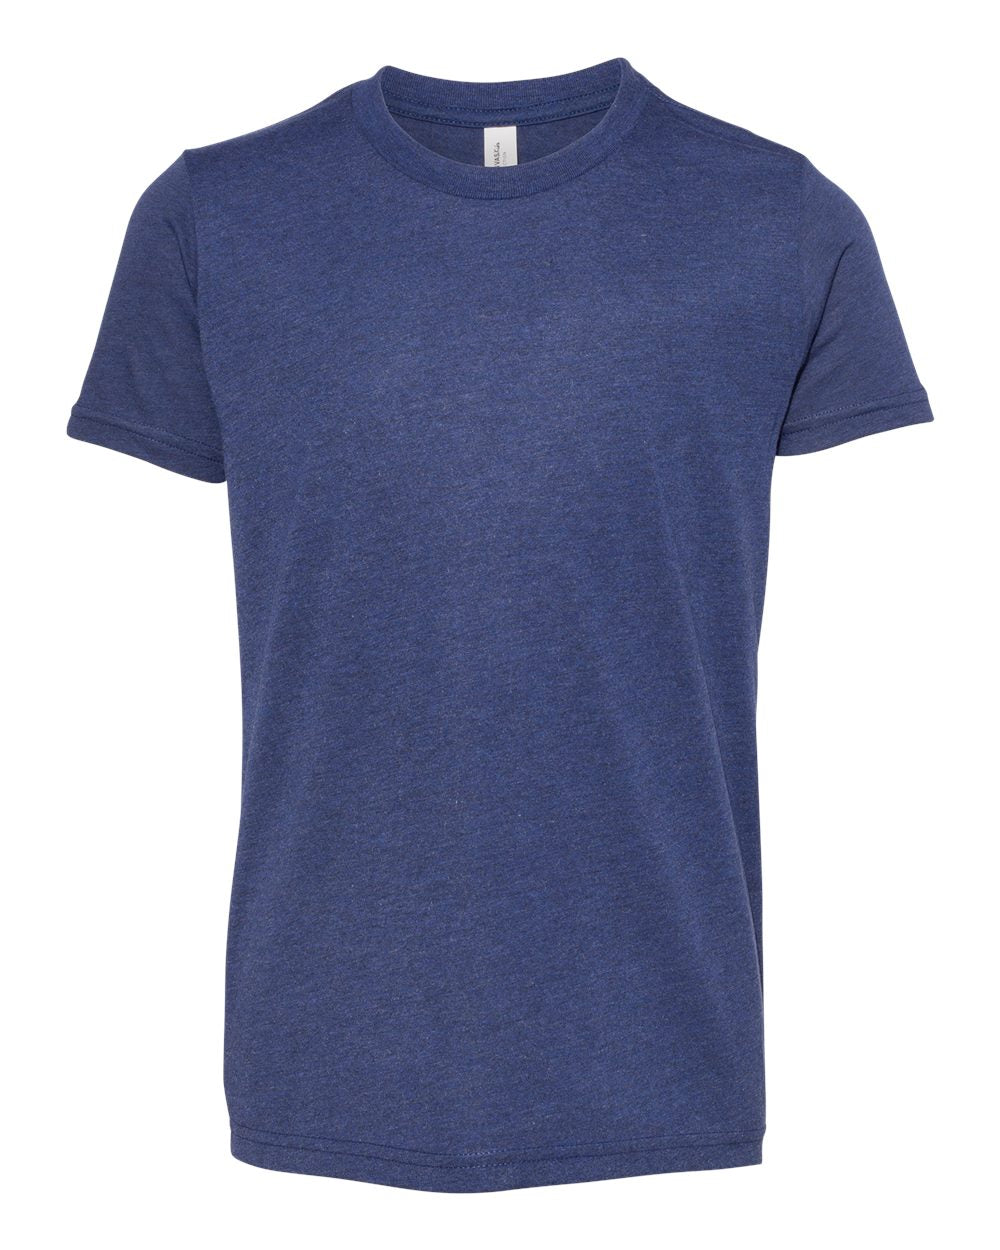 BELLA + CANVAS Youth Triblend Tee 3413Y #color_Navy Triblend